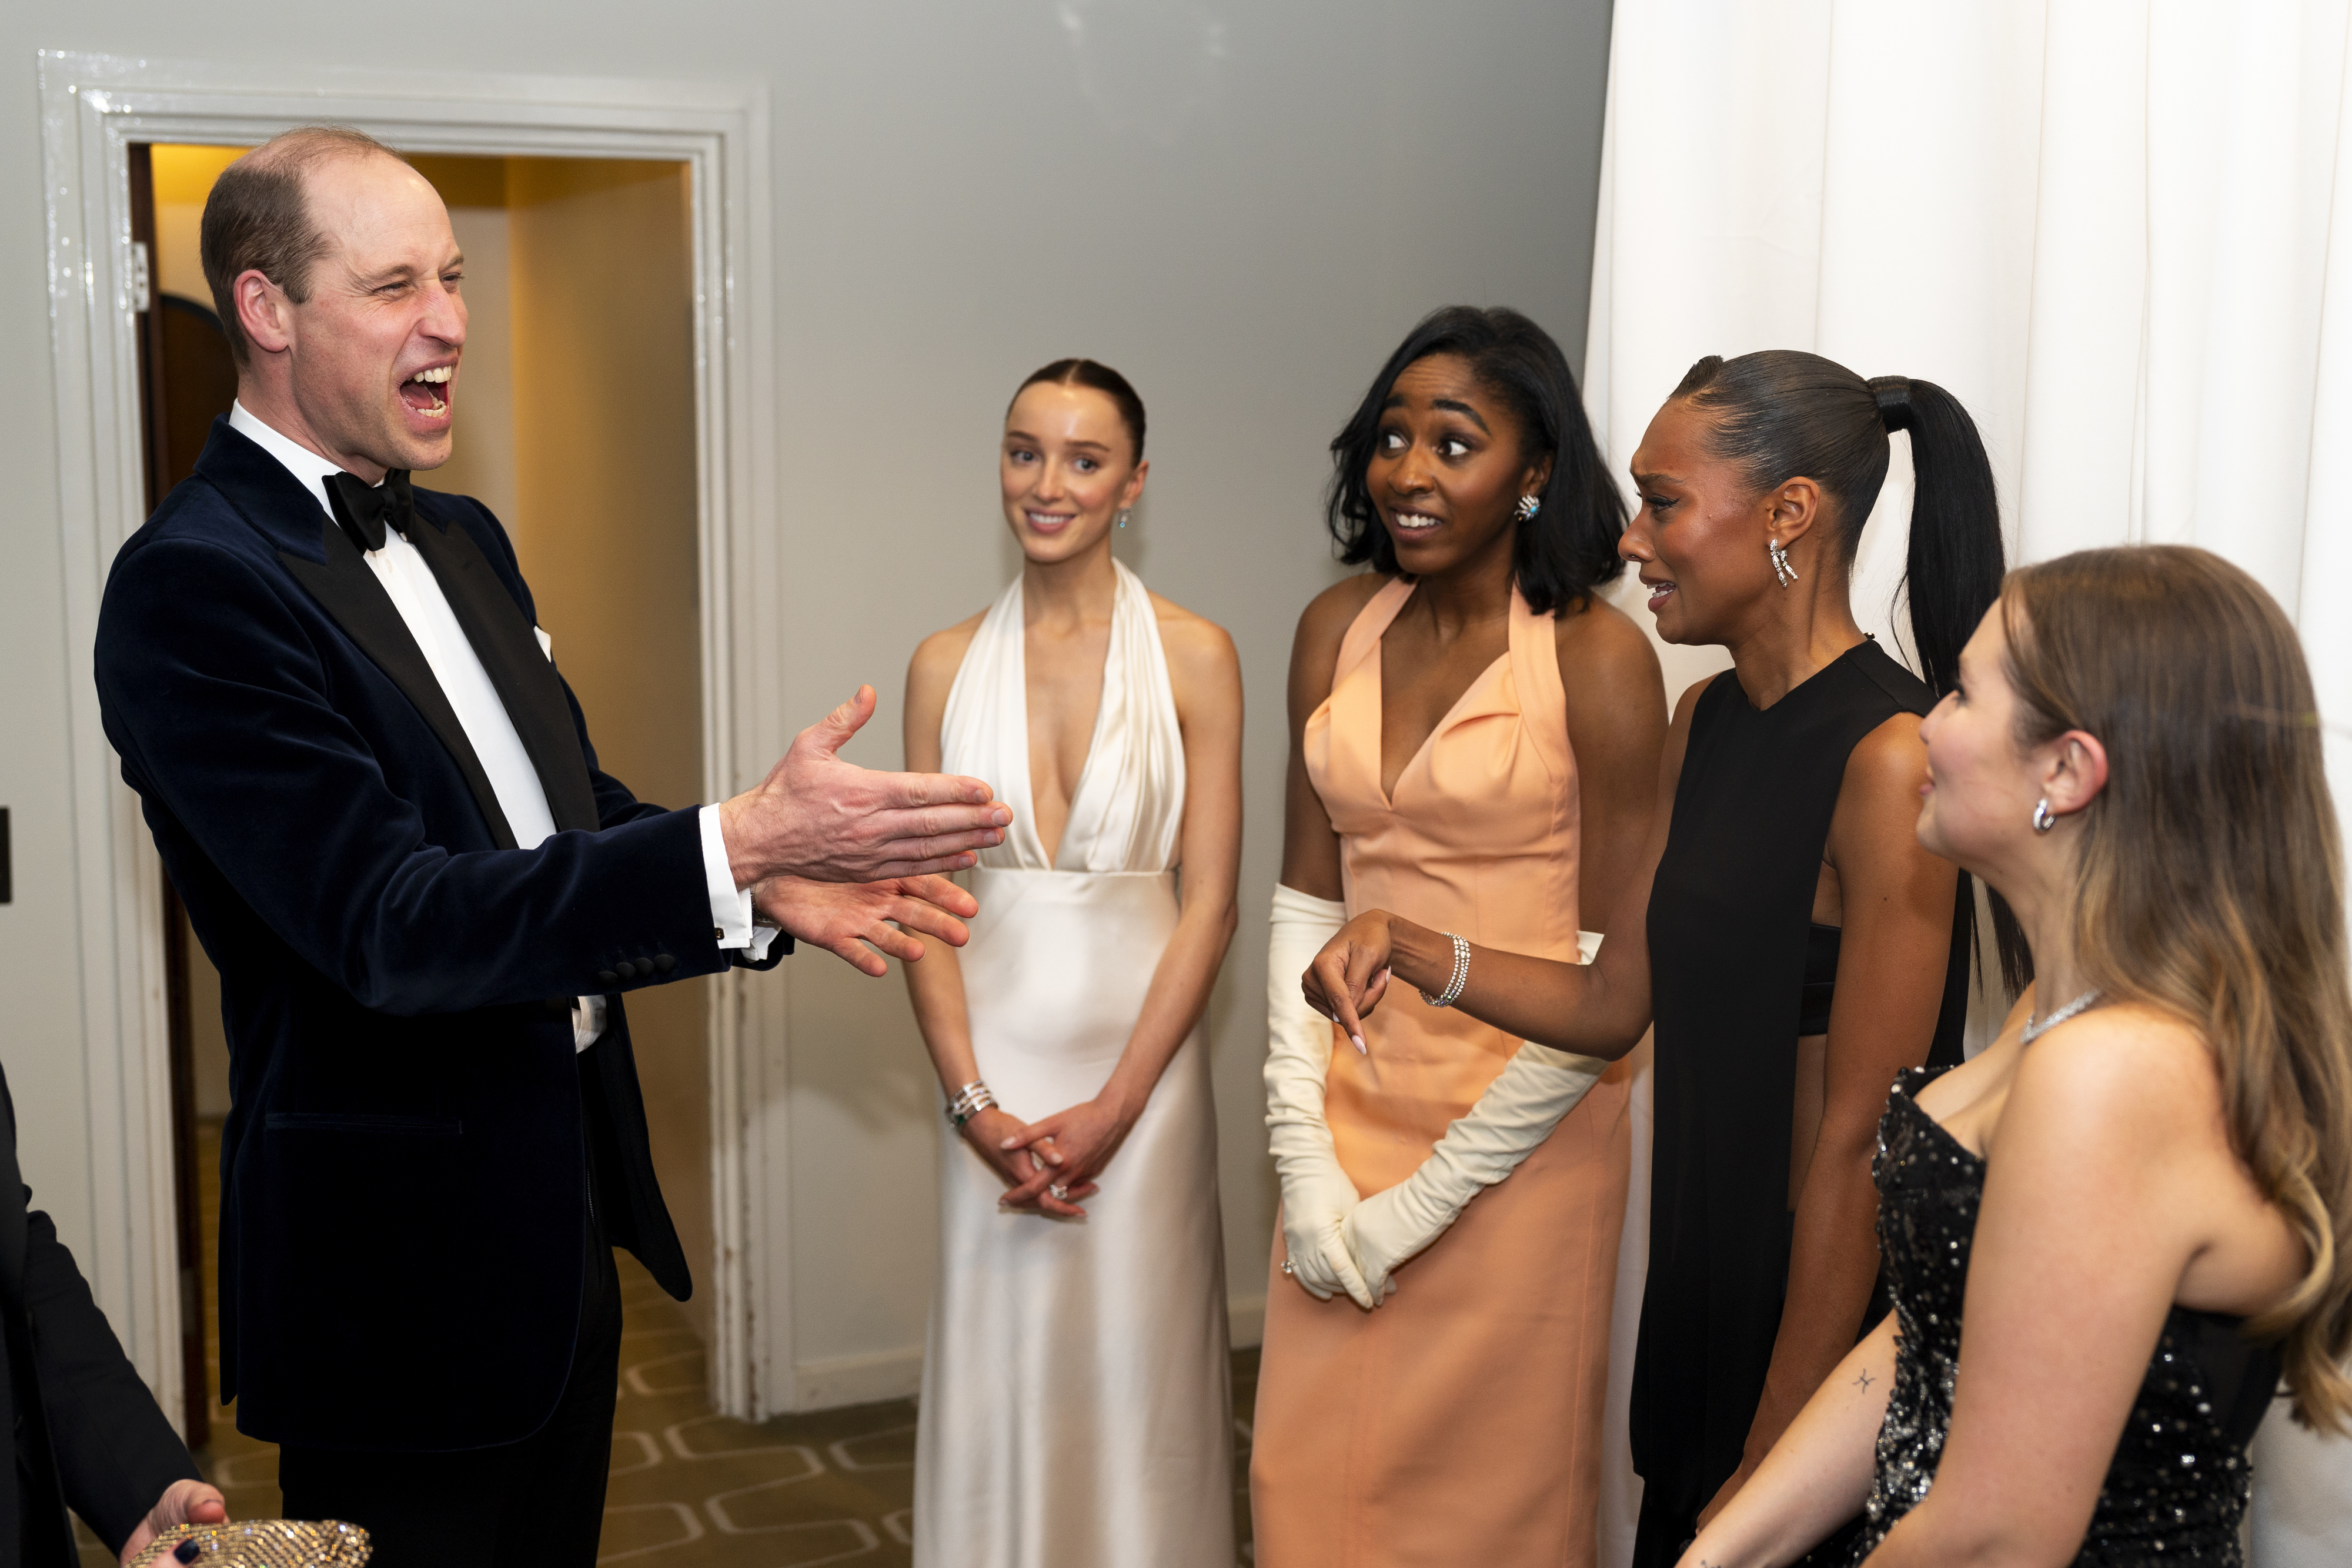 William gesticulating to the four women